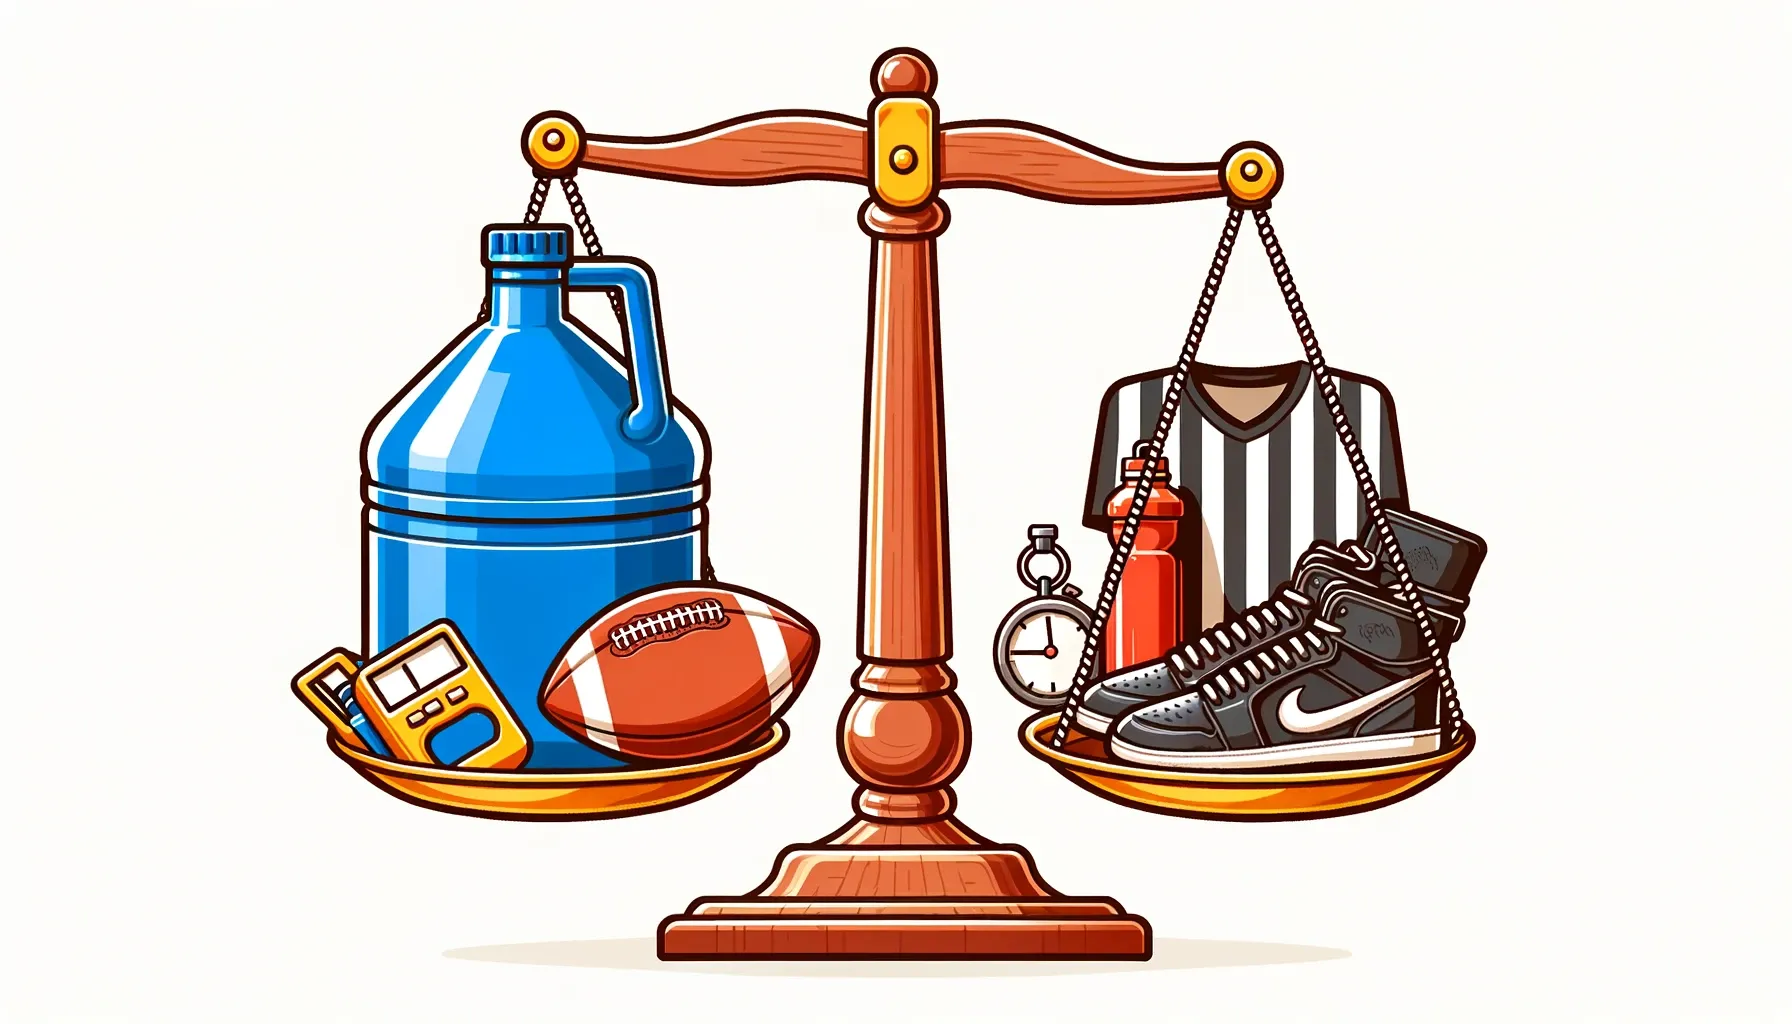 Balance scale with BORG jug and athletic equipment.